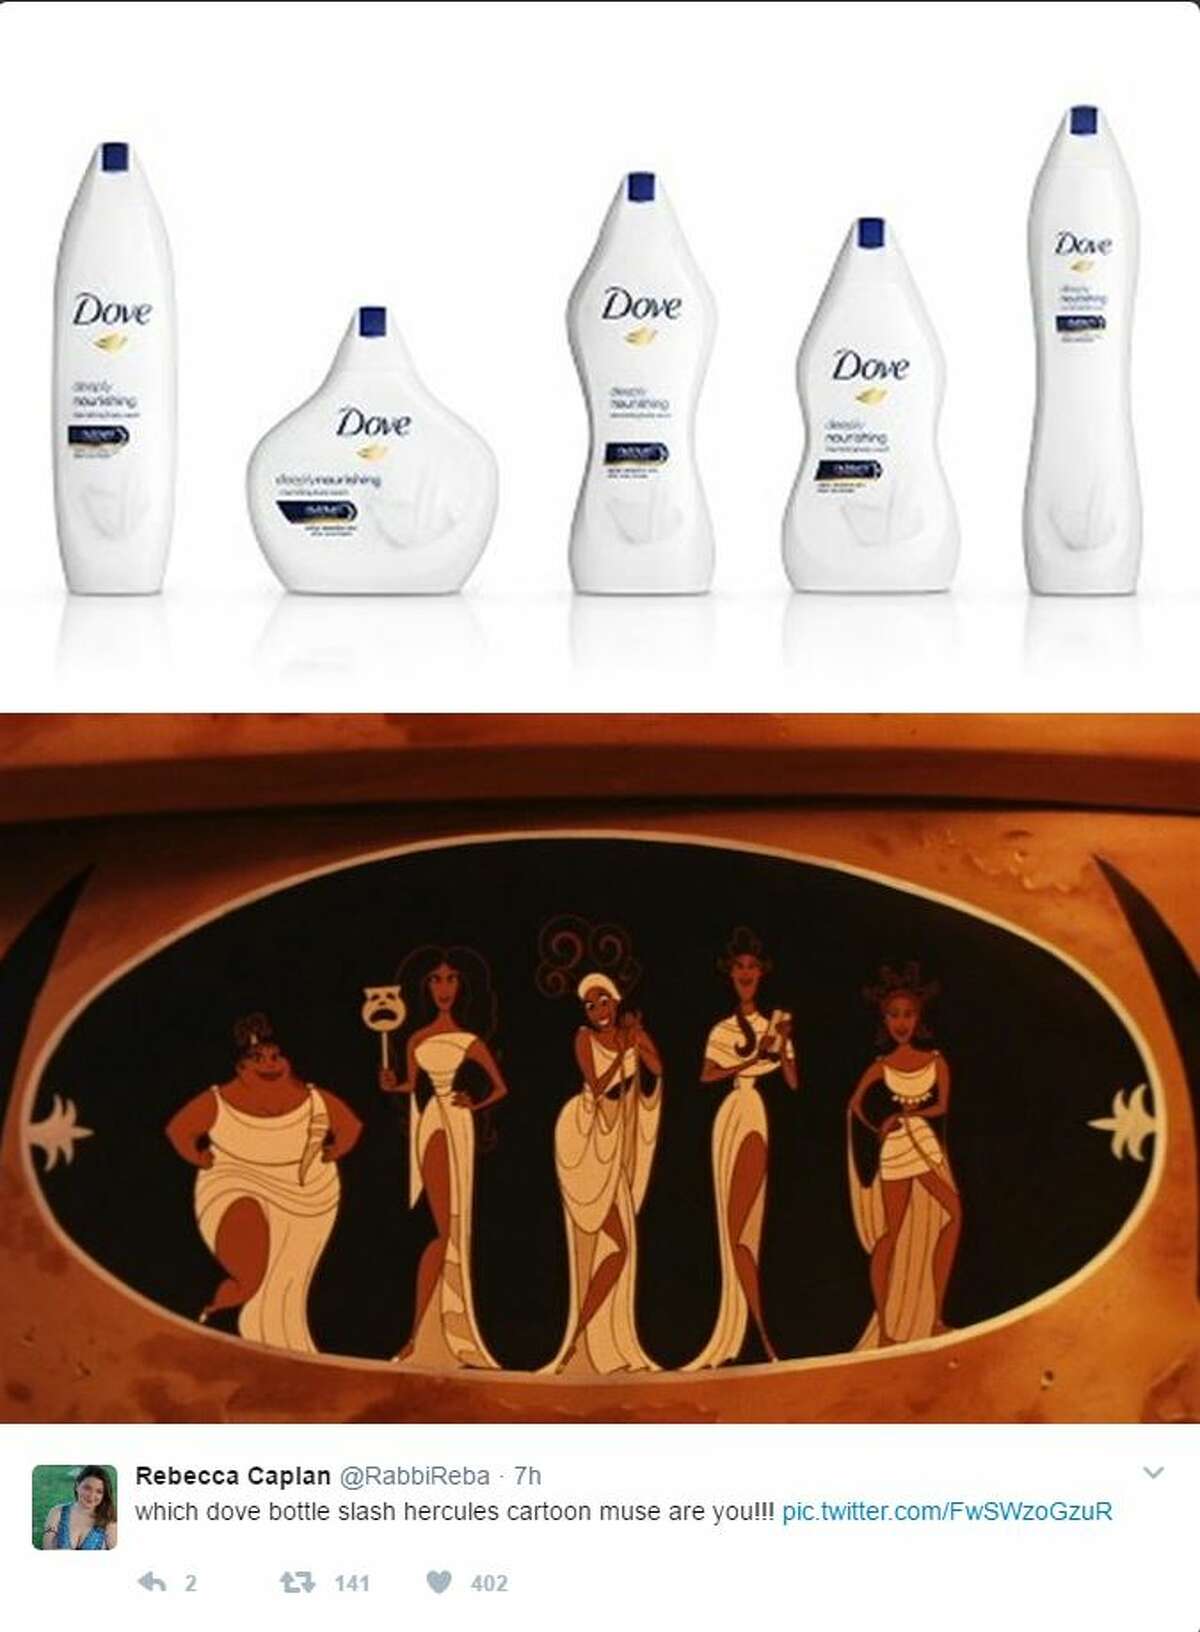 Dove released soap bottles based on body types and the internet is confused